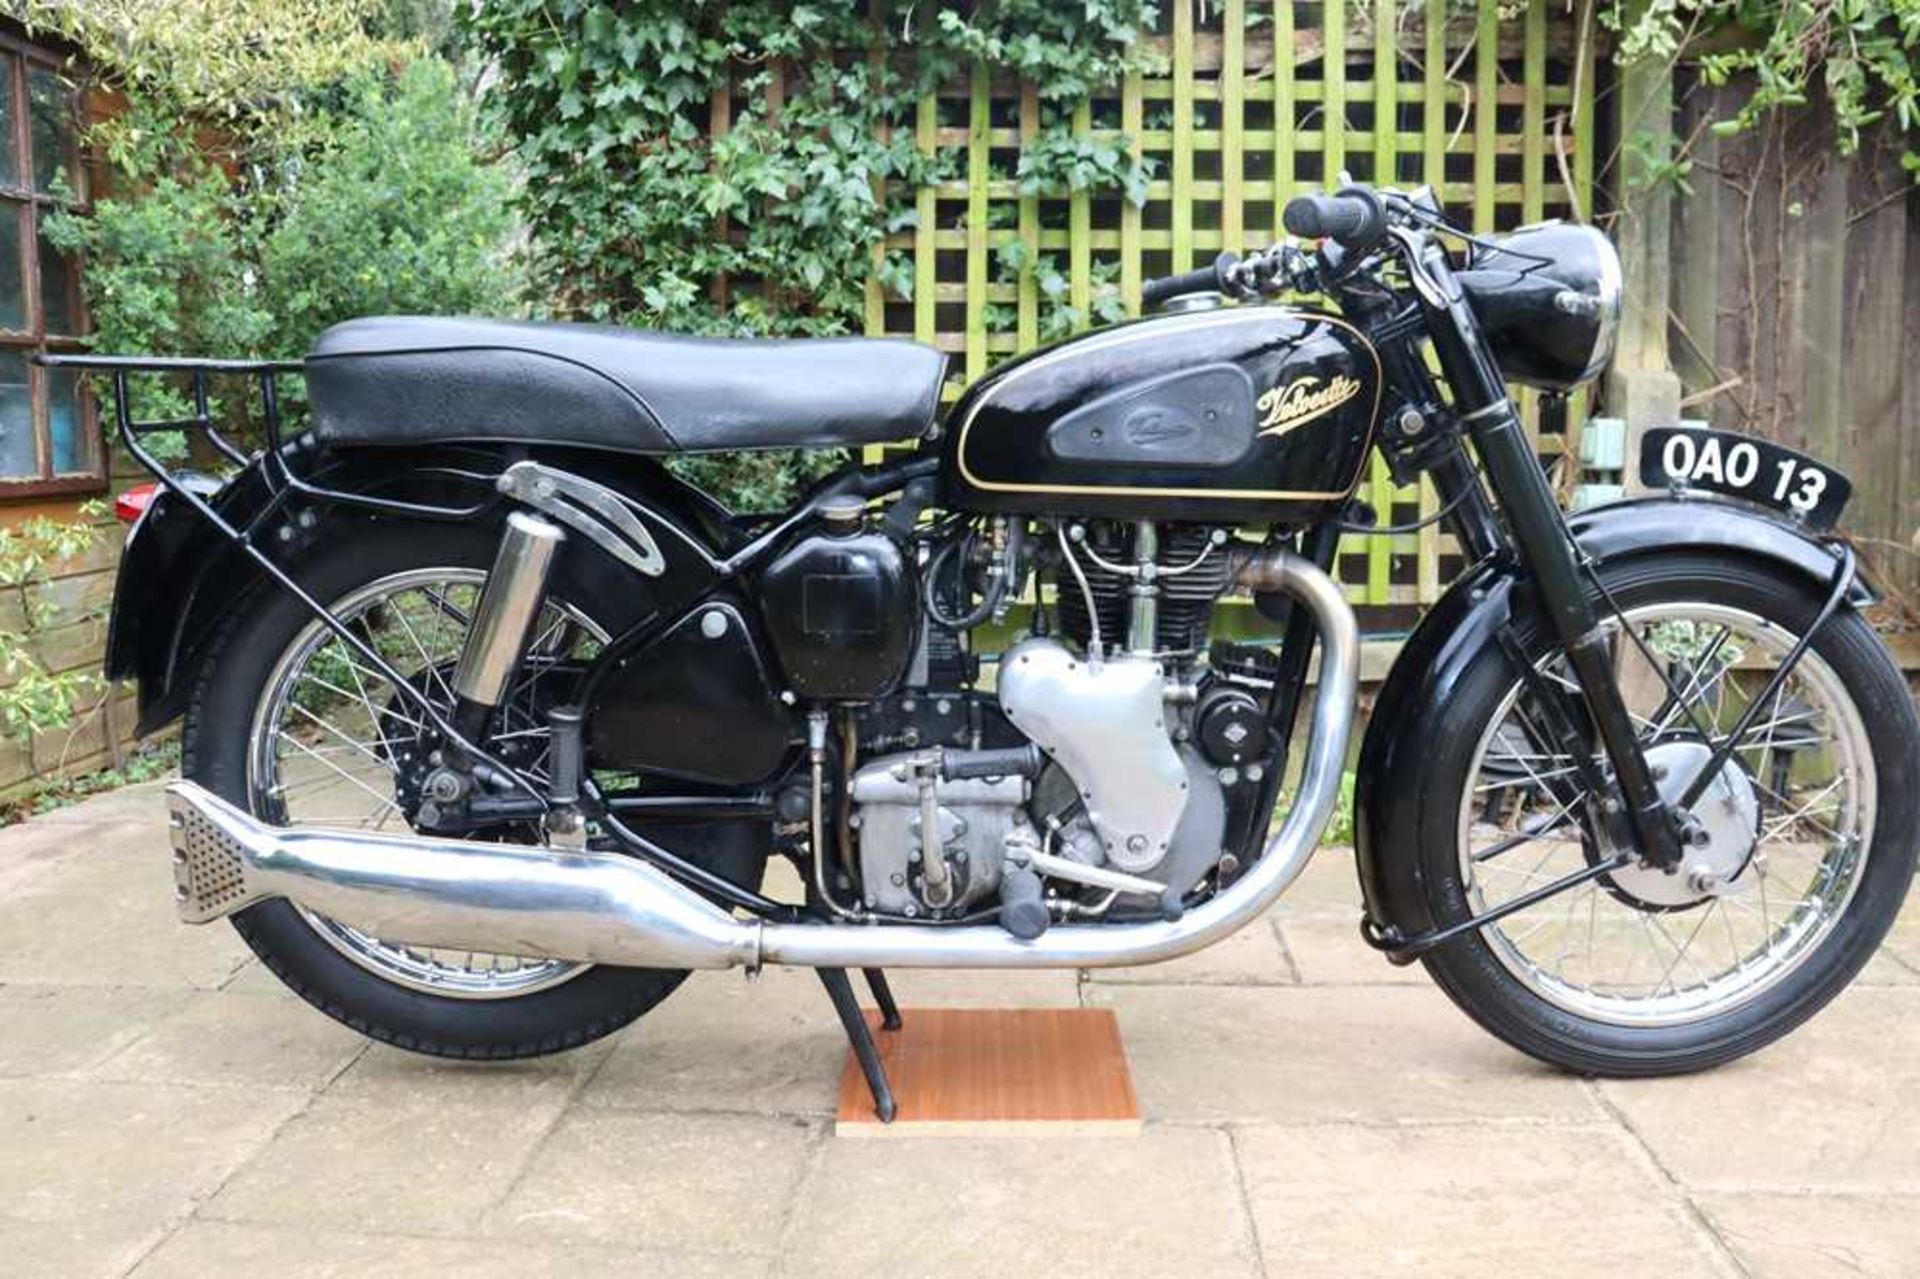 1954 Velocette MSS Fitted with an Alton electric starter kit